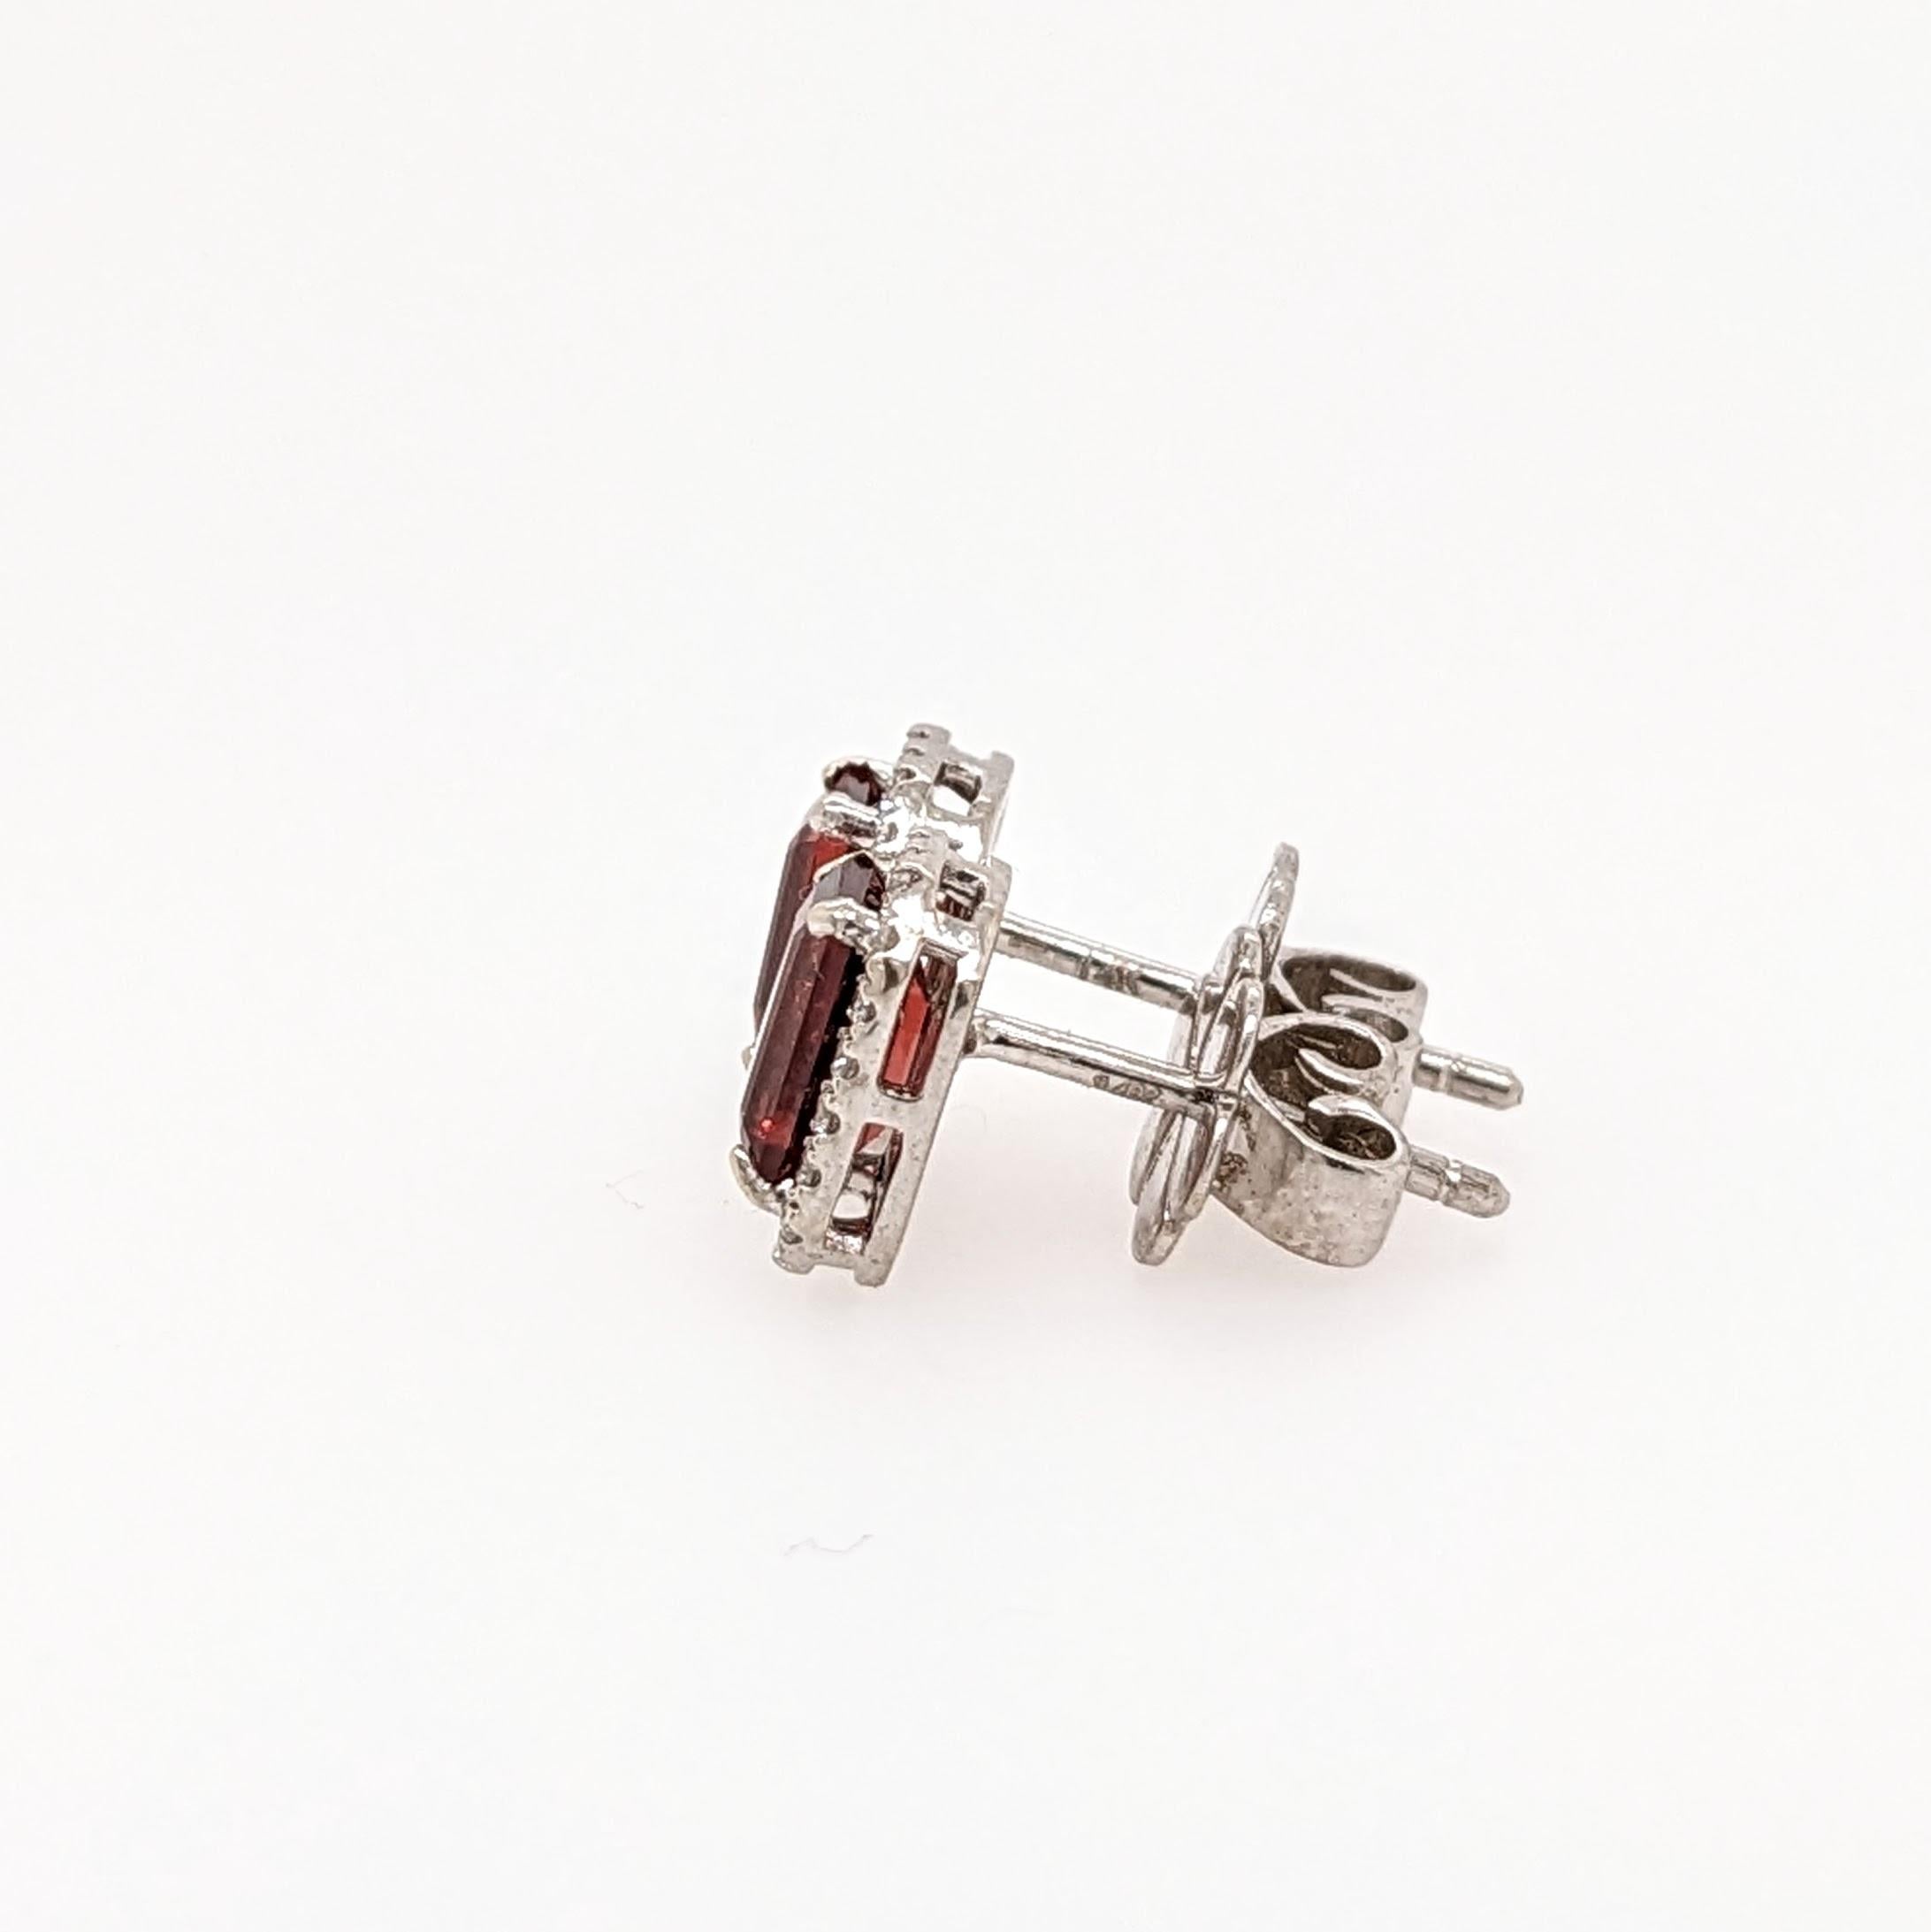 These everyday-wear, pushback studs feature red garnet gemstones and a natural diamond halo in 14k solid white gold. A great gift perfect for office wear or a fancy occasion!

Specifications
Item Type: Earrings
Center Stone: Garnet
Treatment: